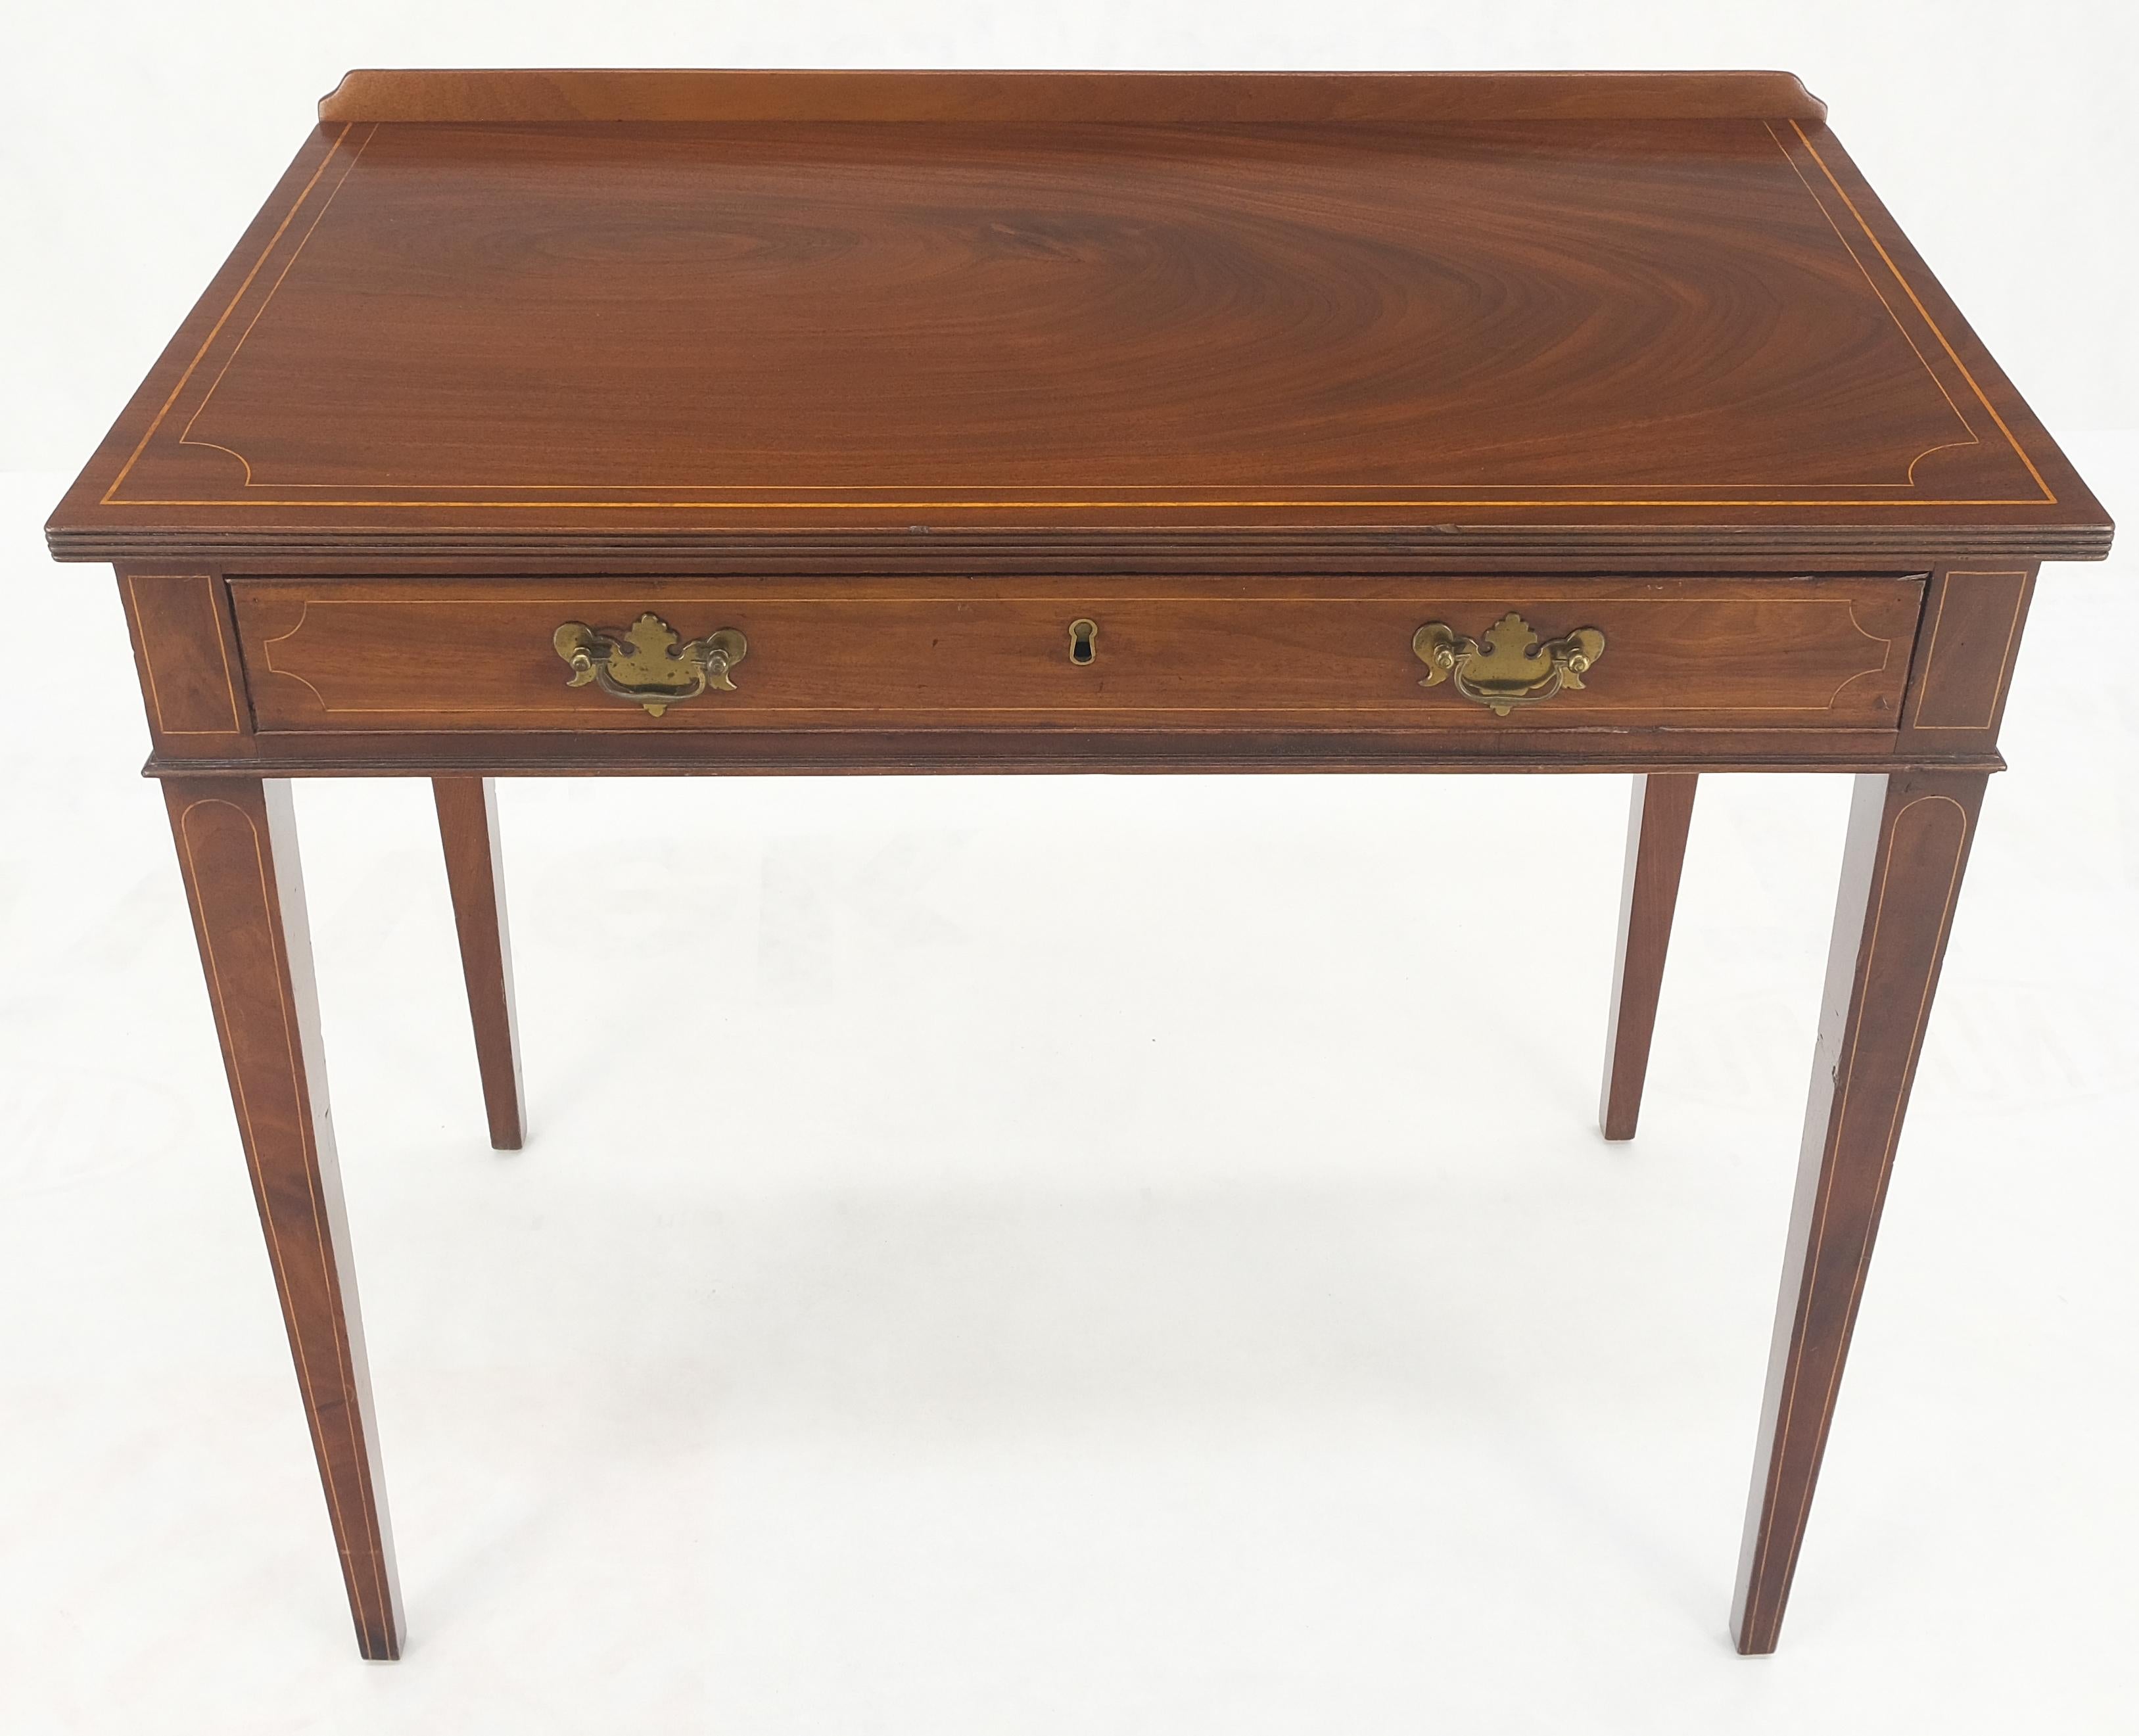 c.1880 Fine One Drawer Inlayed Solid Crotch Mahogany Top Console Table Server Petite Desk Sideboard w/ Backsplash  MINT !